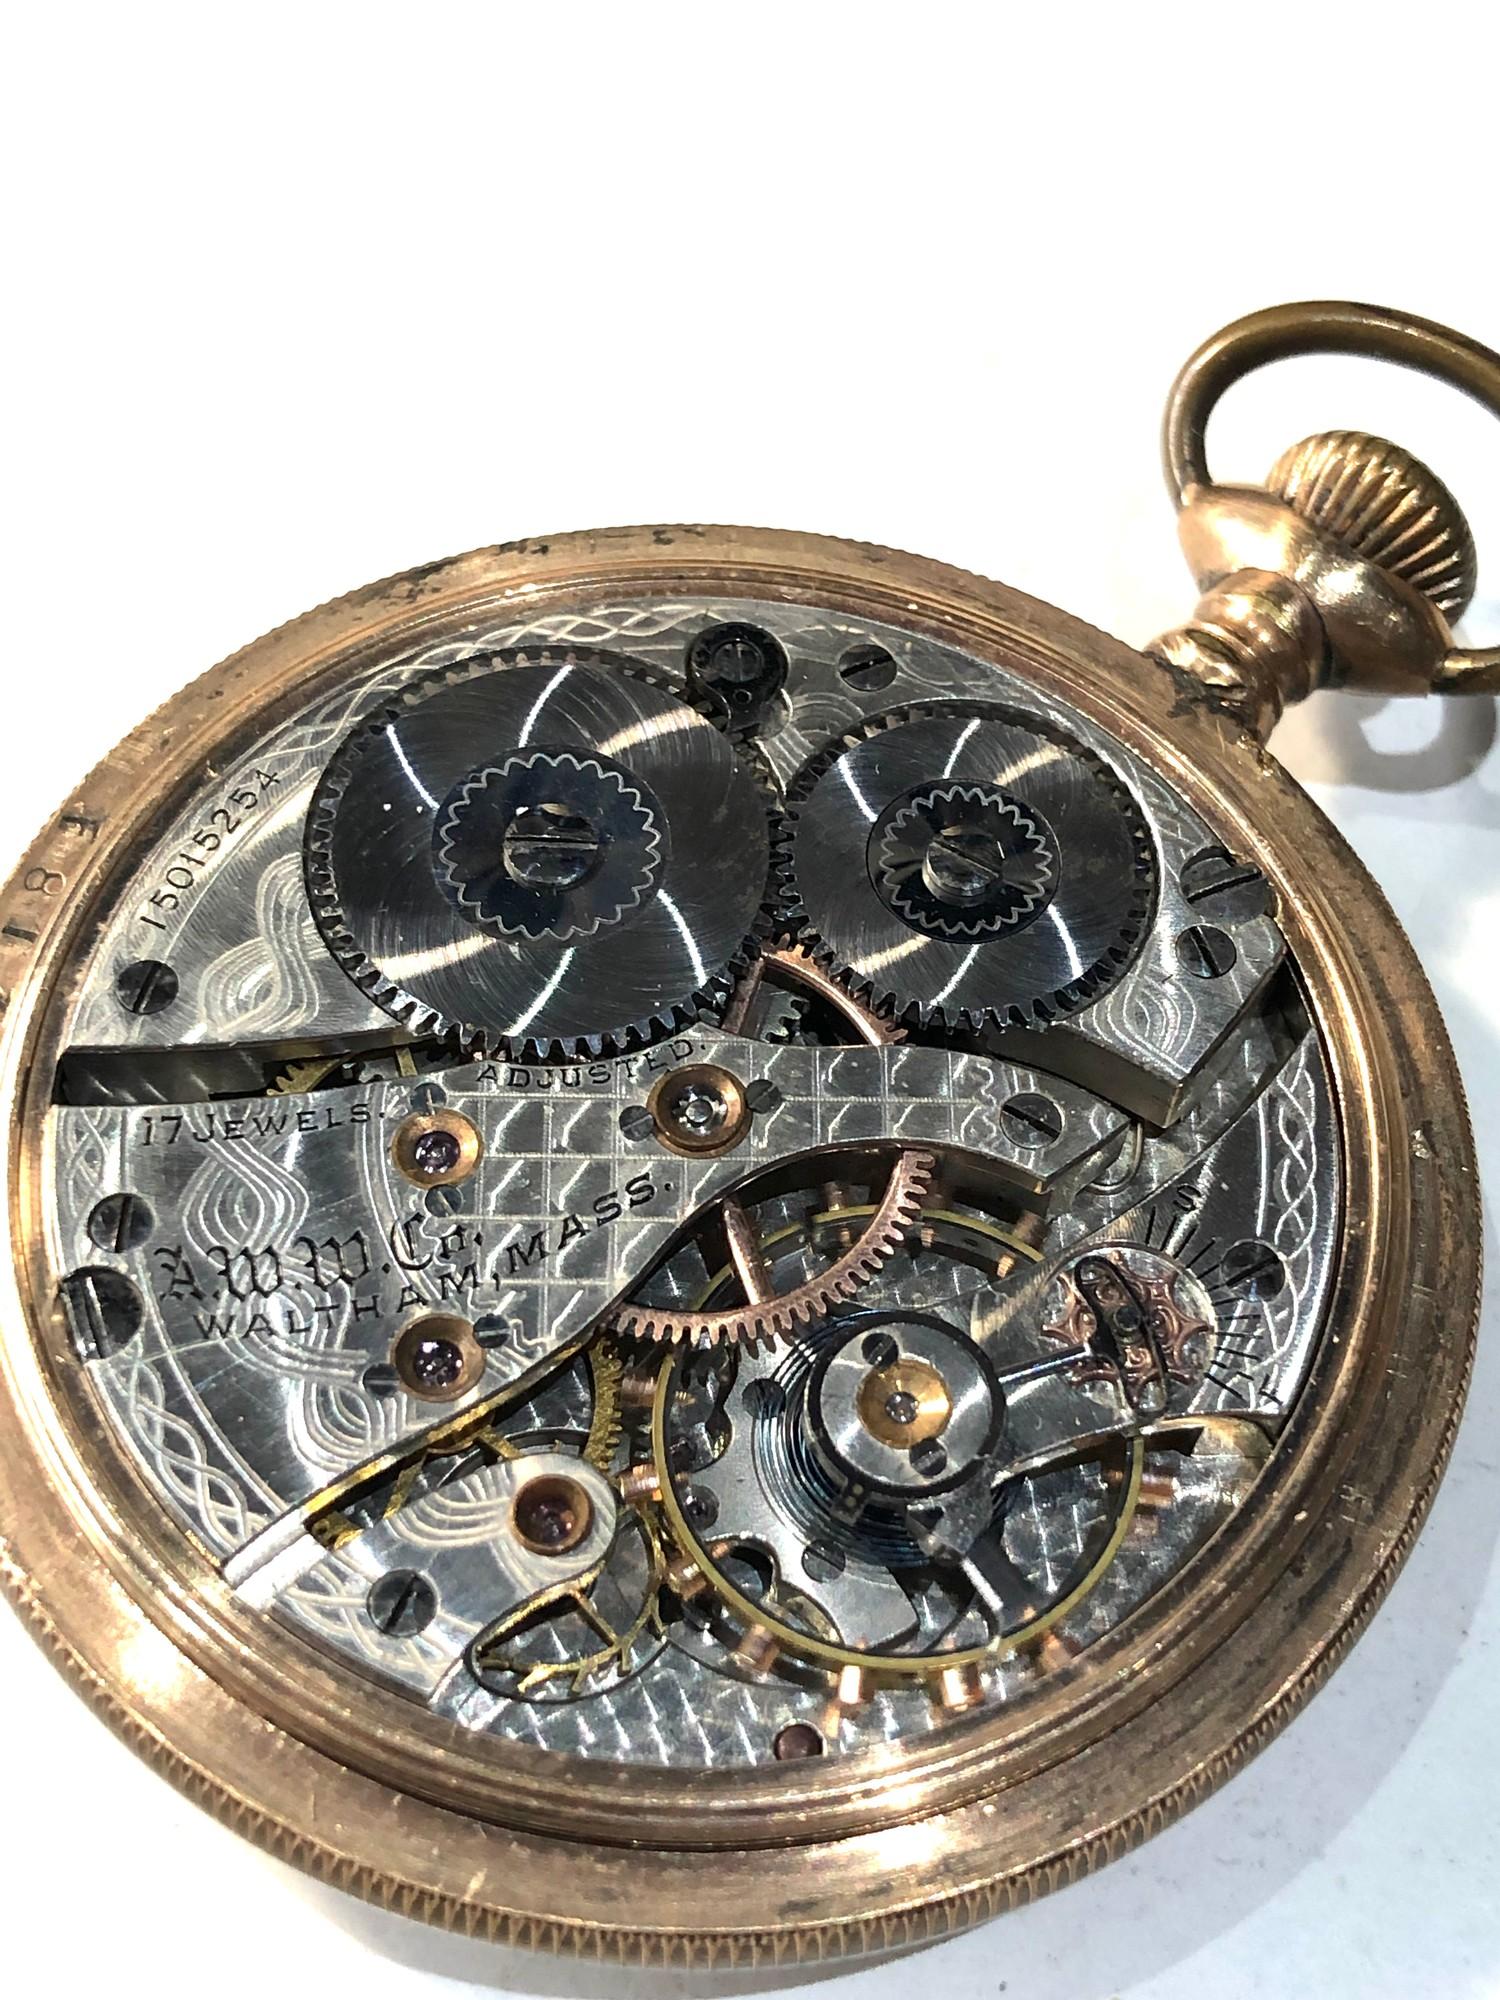 Antique gold plated cased waltham pocket watch balance will spin fully wound but sold as parts - Image 4 of 4